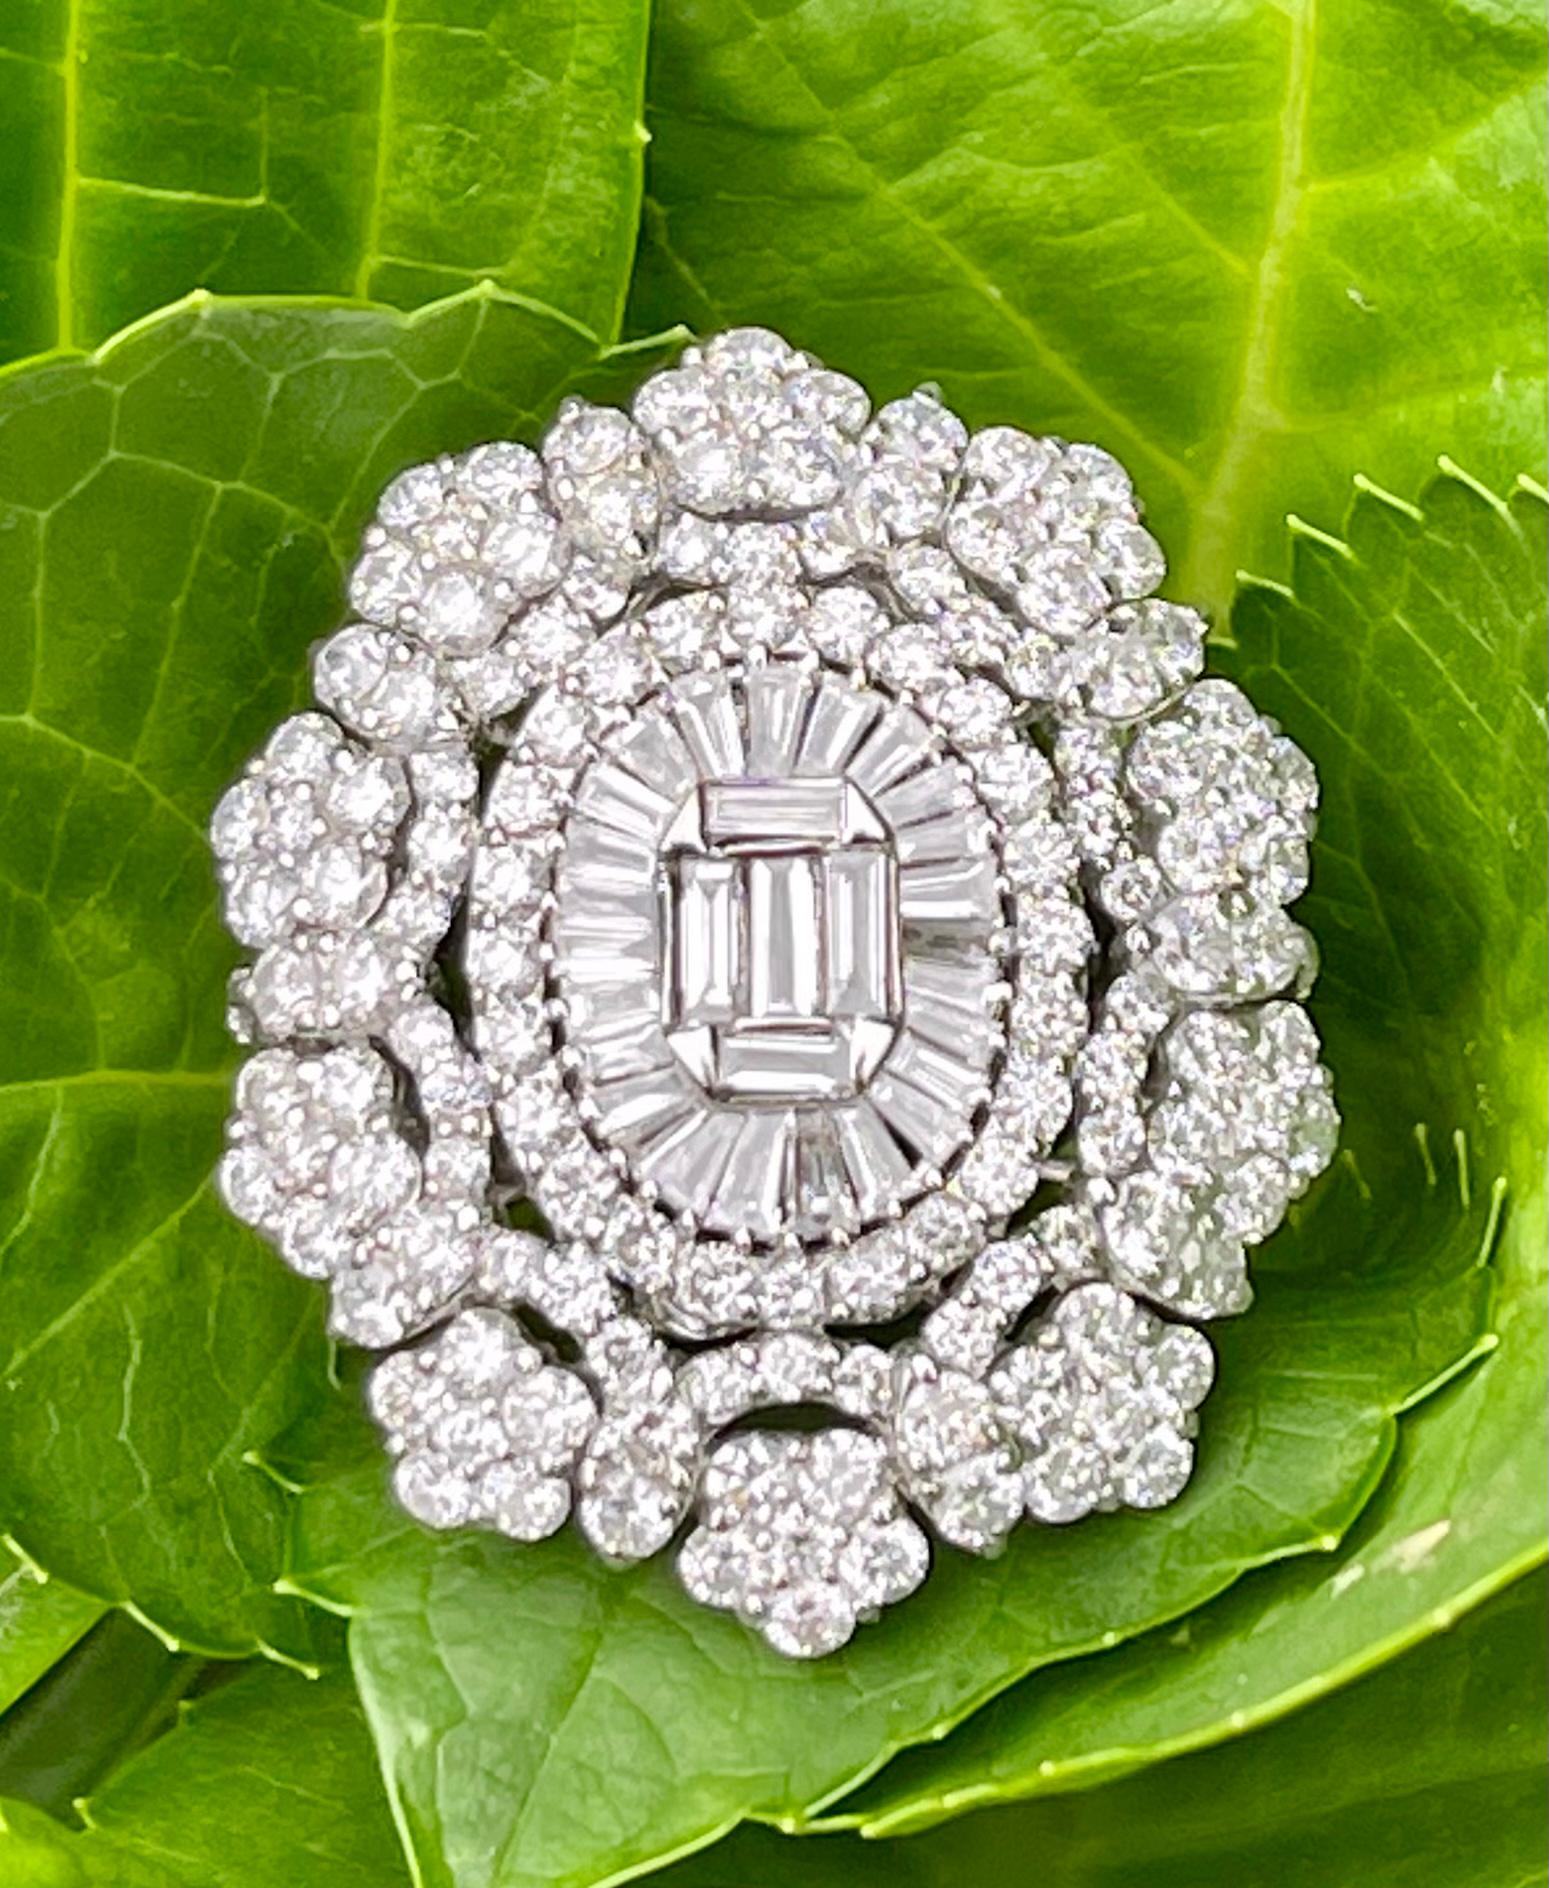 A spectacular, very sparkly in real life, approximately 9 carat diamond oval medallion shaped cocktail ring is set in 18 karat white gold and is comprised of approximately 203 round brilliant and baguette cut diamonds.  The medallion design features